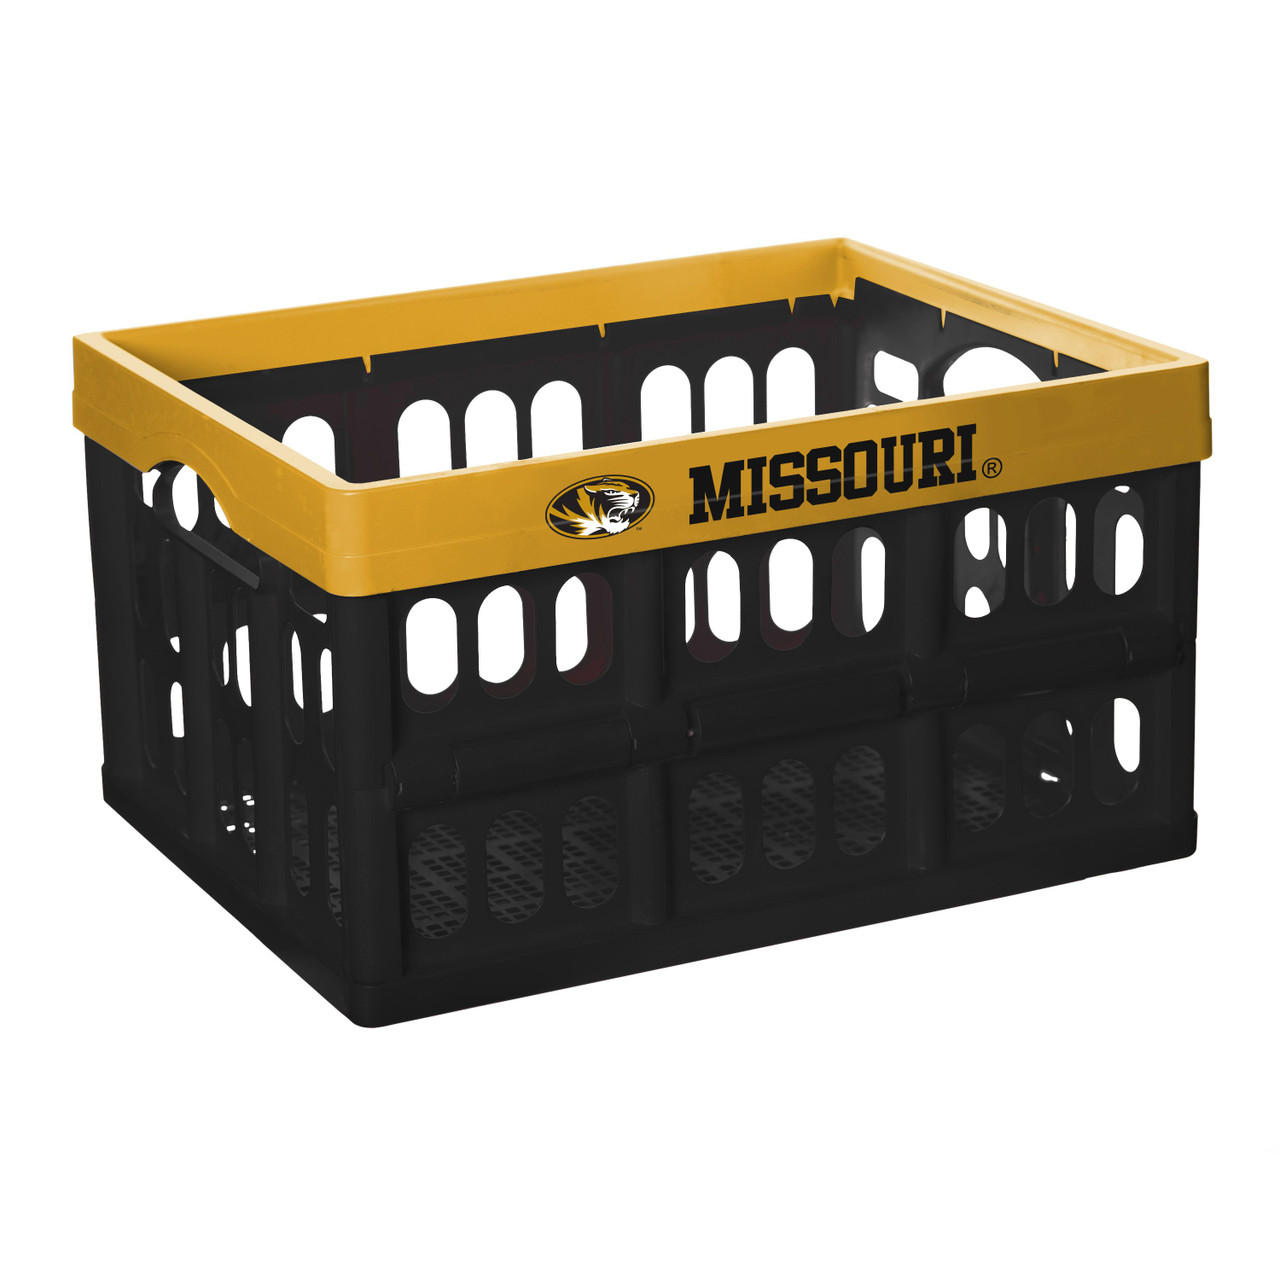 Missouri Tigers Team Collapsible Storage Crate